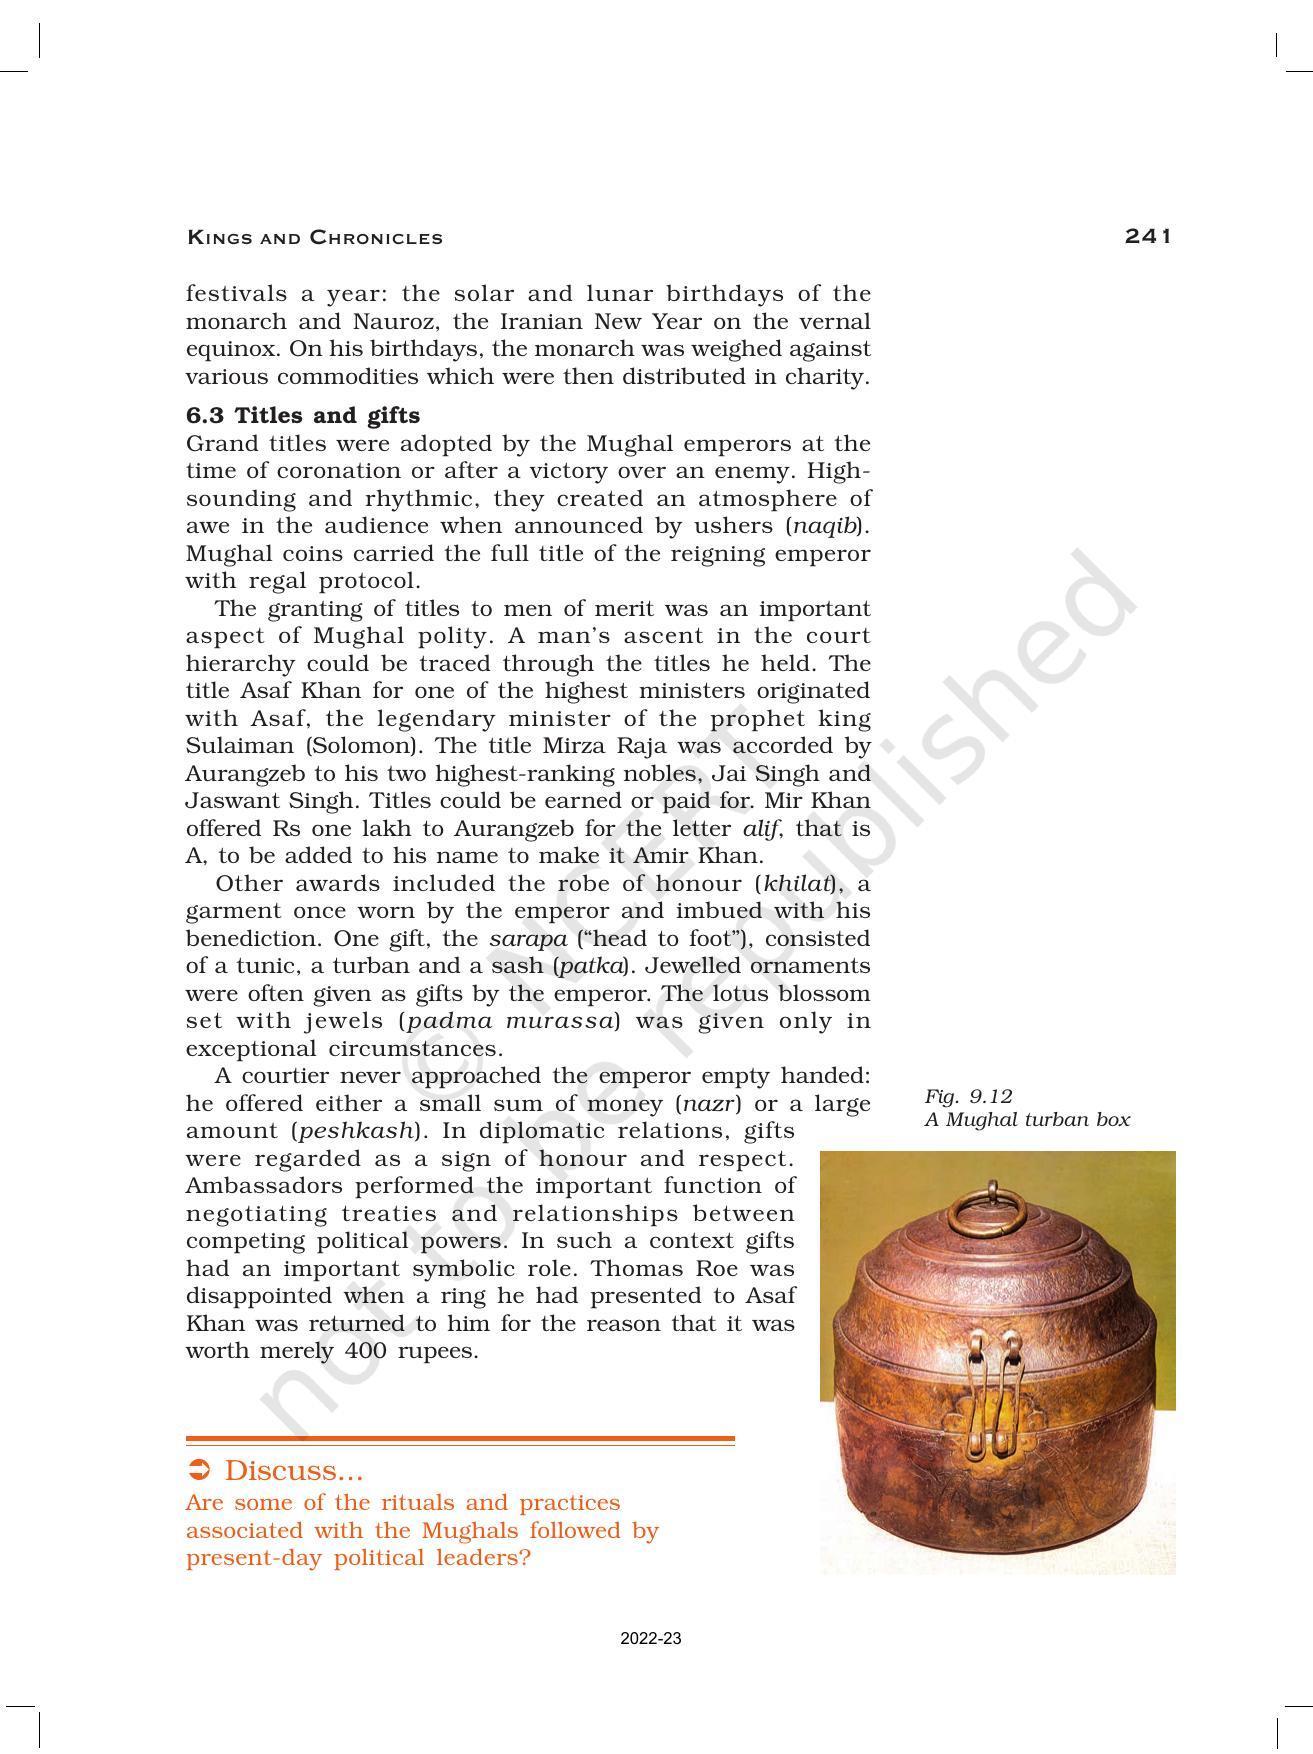 NCERT Book for Class 12 History (Part-II) Chapter 9 Kings and Chronicles - Page 18